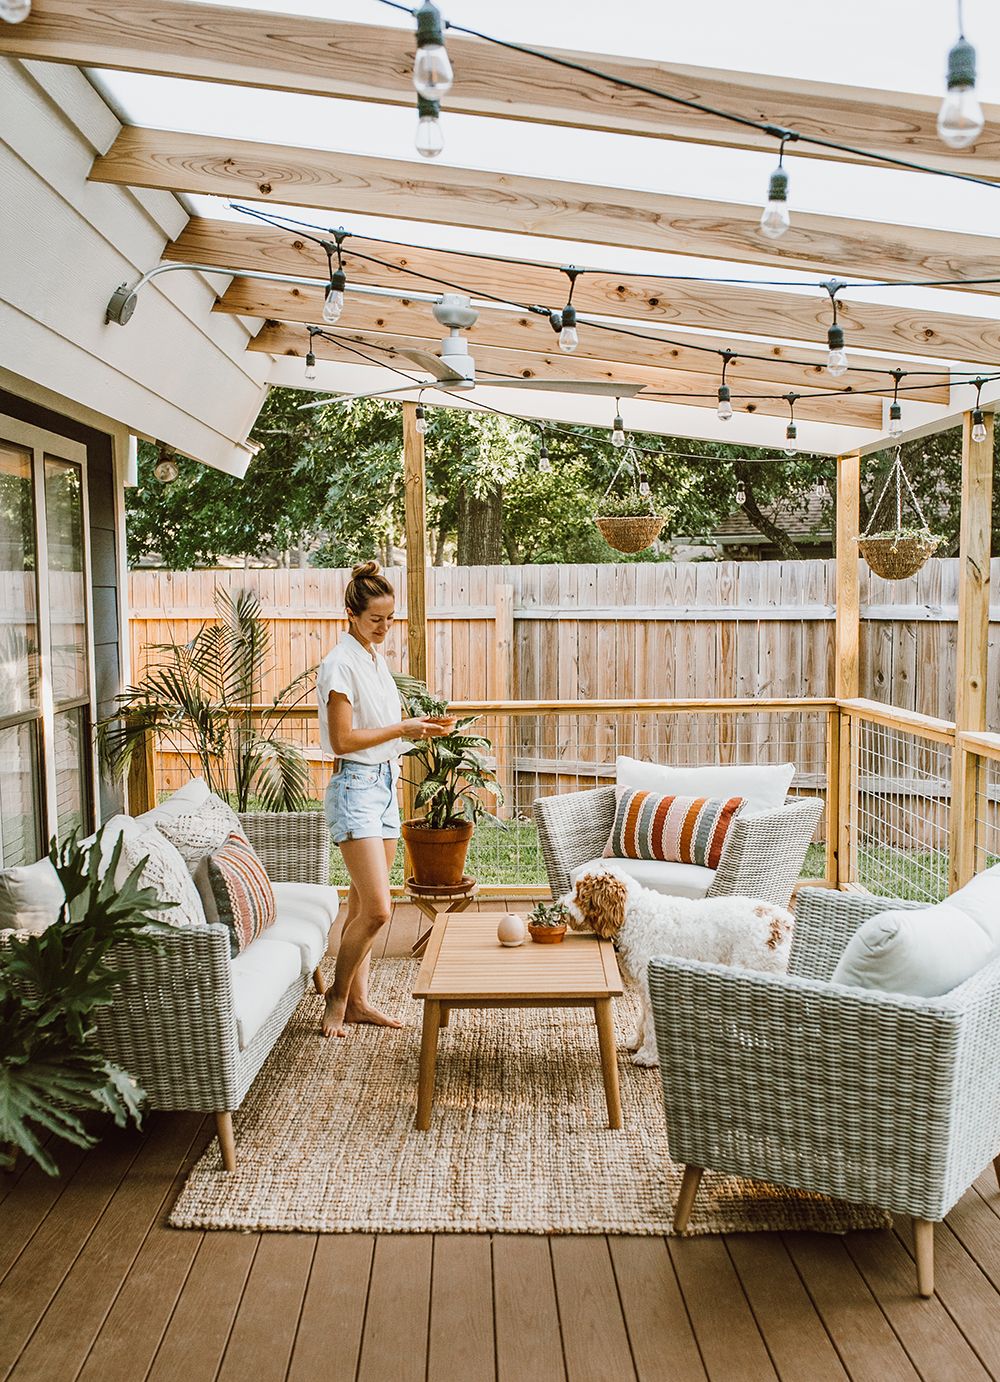 Tips for purchasing and maintaining patio
furniture sets